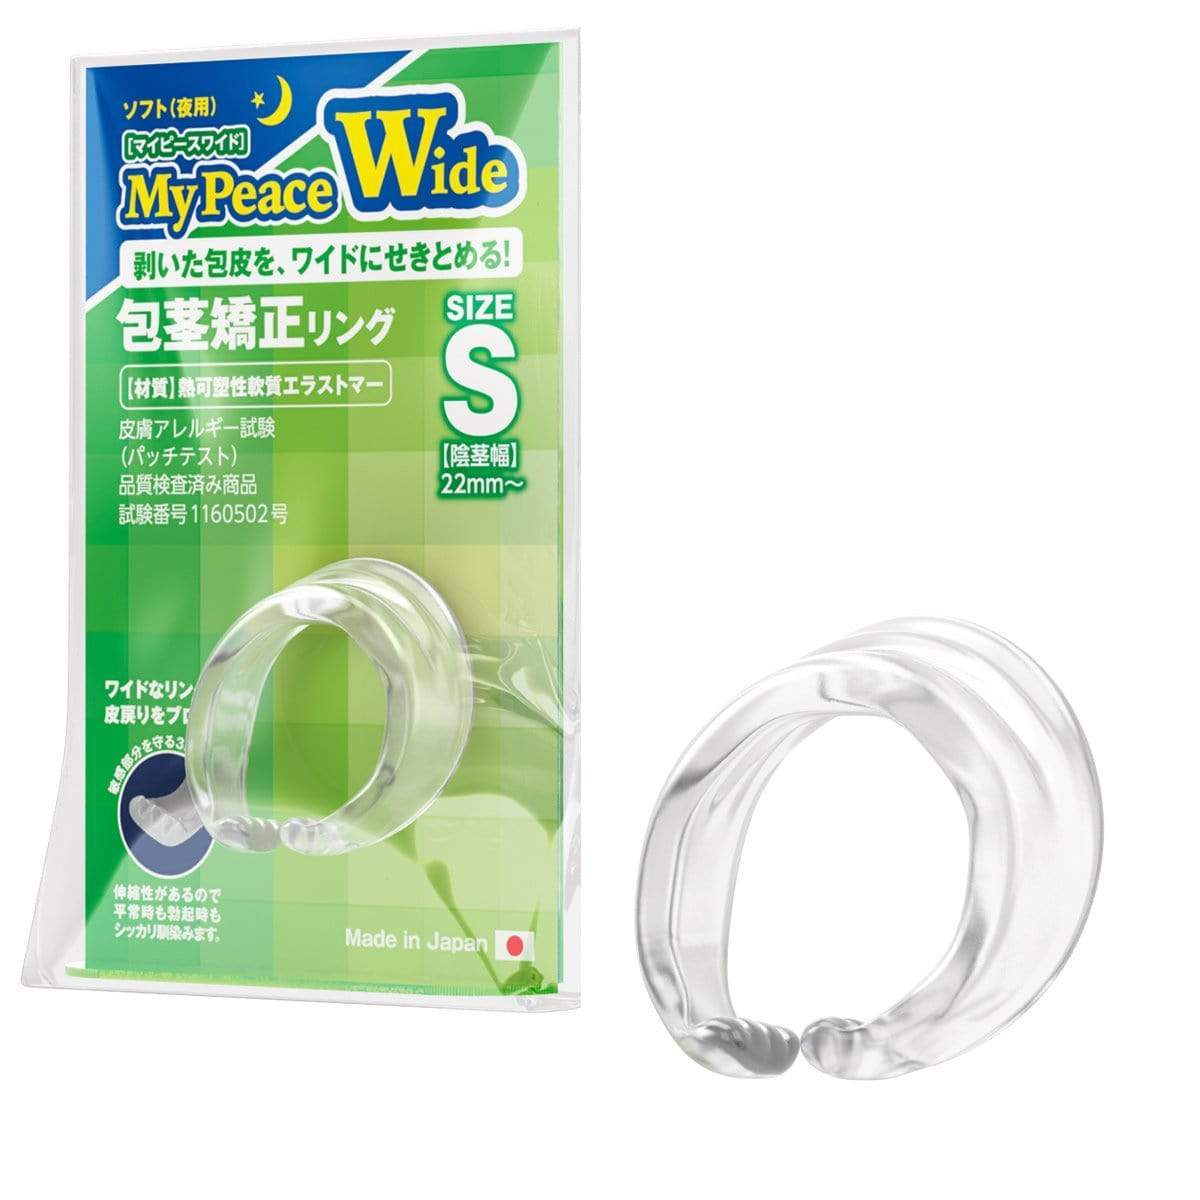 SSI Japan - My Peace Wide Soft Night Size S Correction Cock Ring (Clear) -  Cock Ring (Non Vibration)  Durio.sg